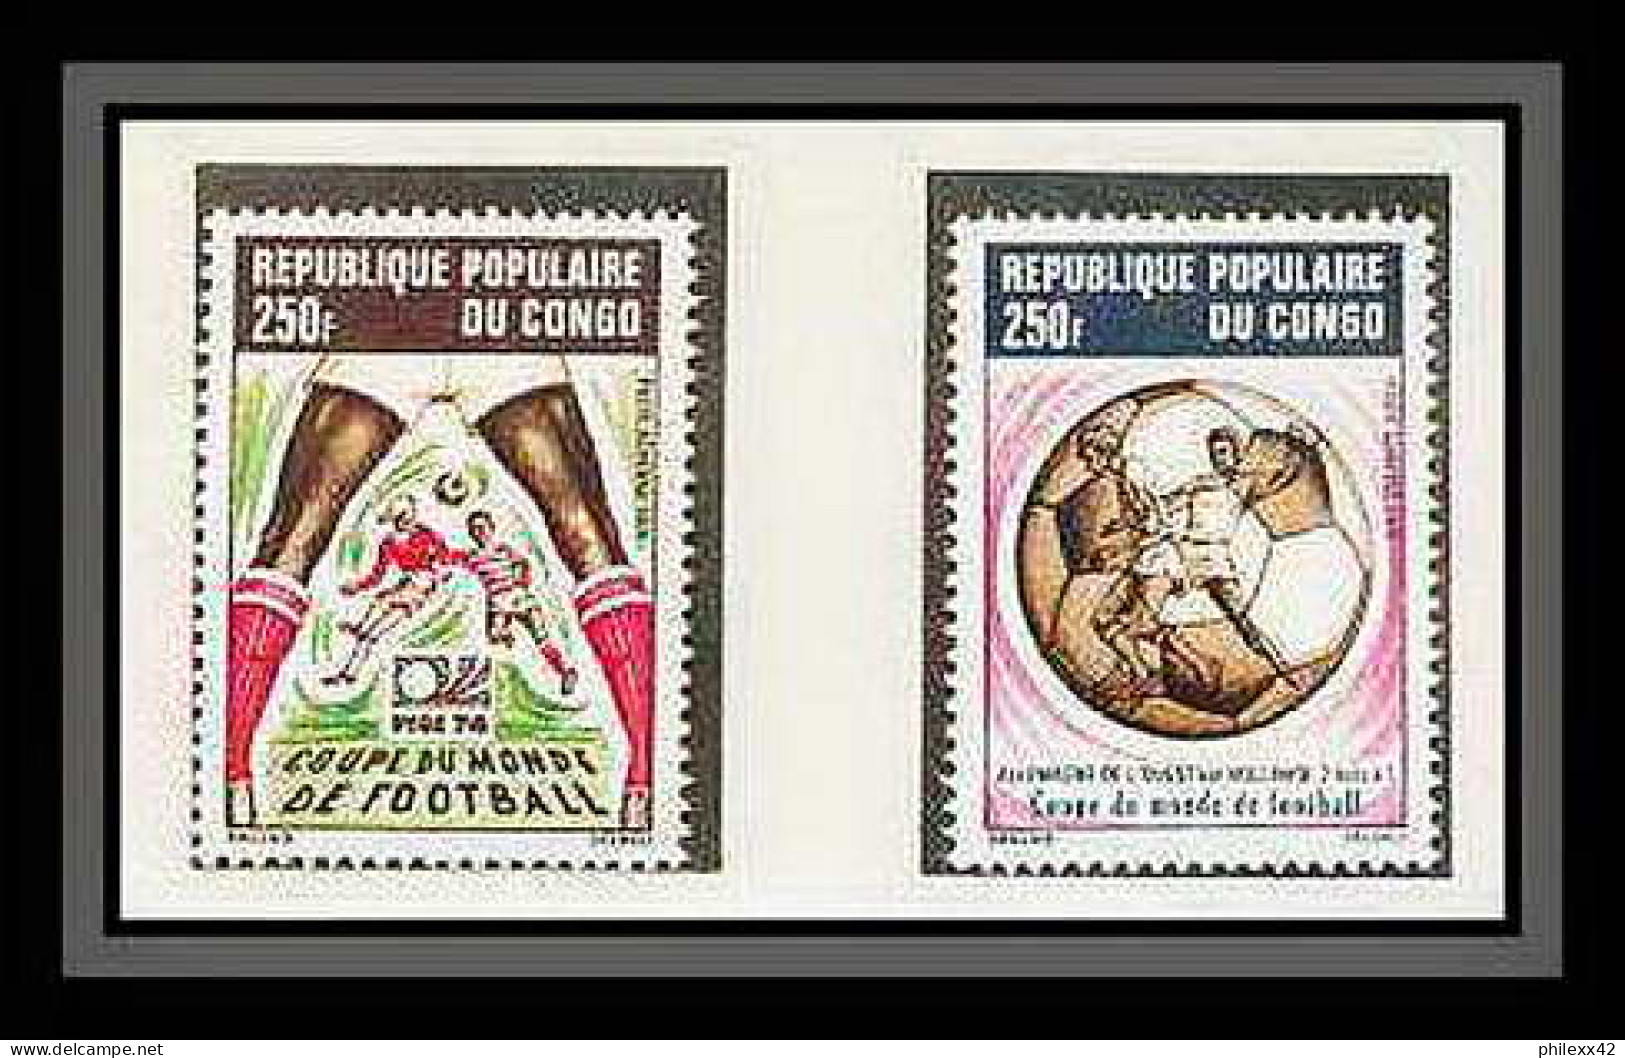 285 Football (Soccer) Allemagne 1974 Munich - Neuf ** MNH - Congo N° 411/6  - 1974 – Germania Ovest